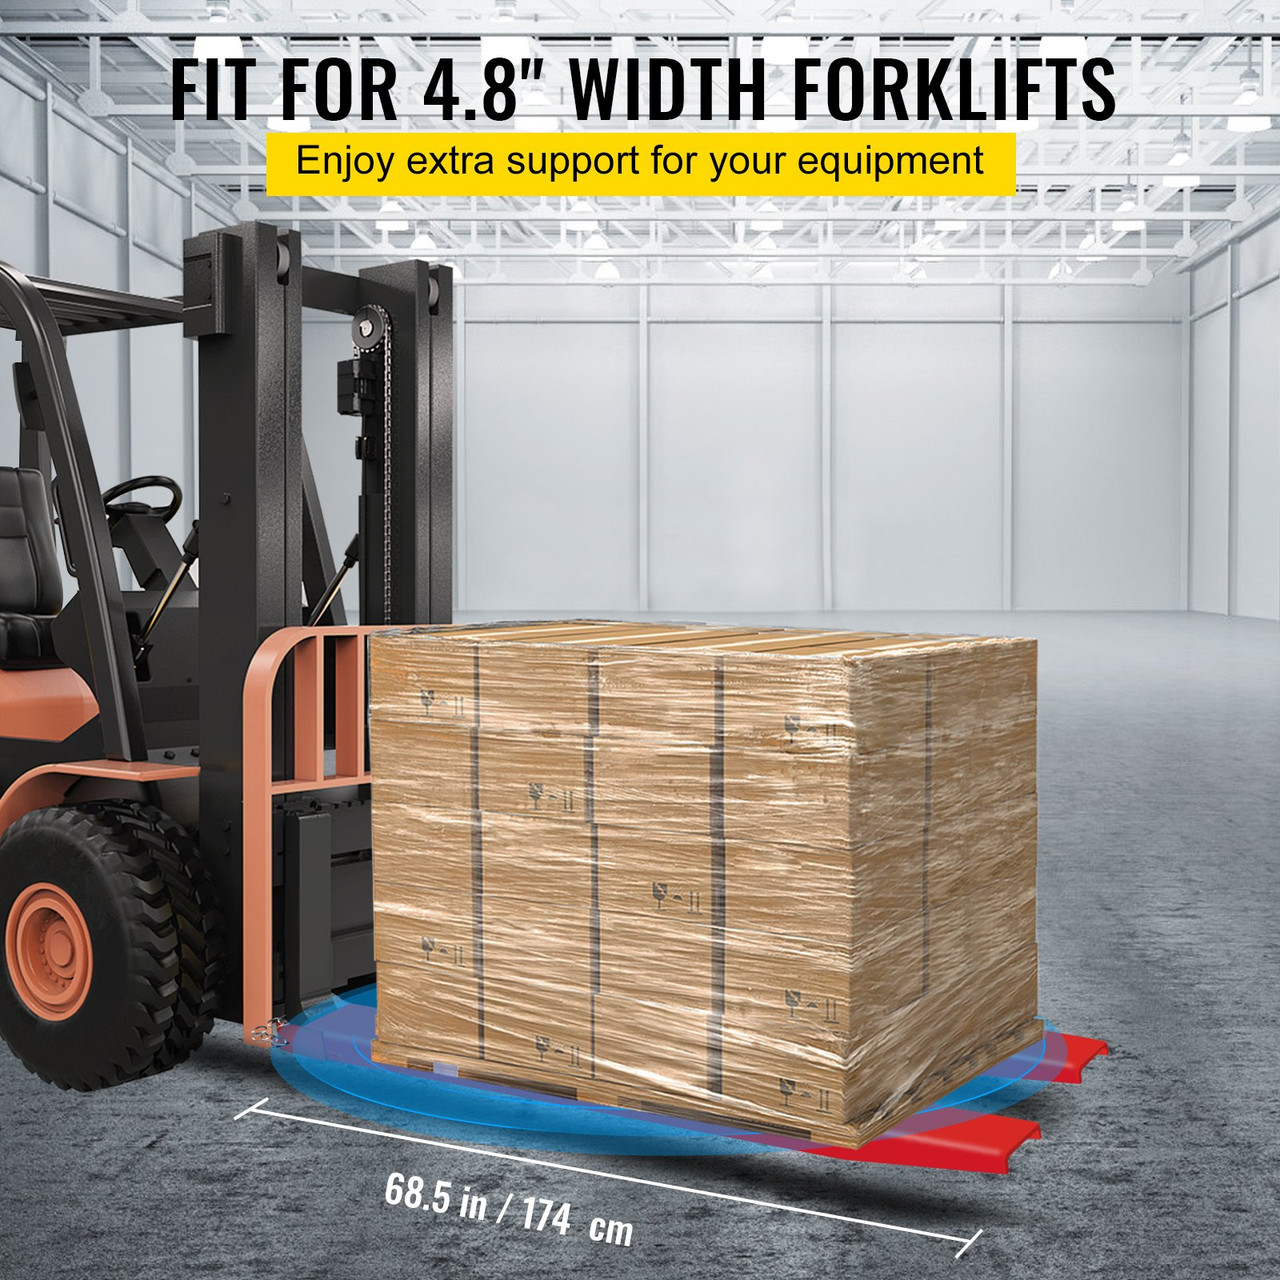 Pallet Fork Extensions Forklift Extensions 72.4'' x 5'' for Loaders Truck